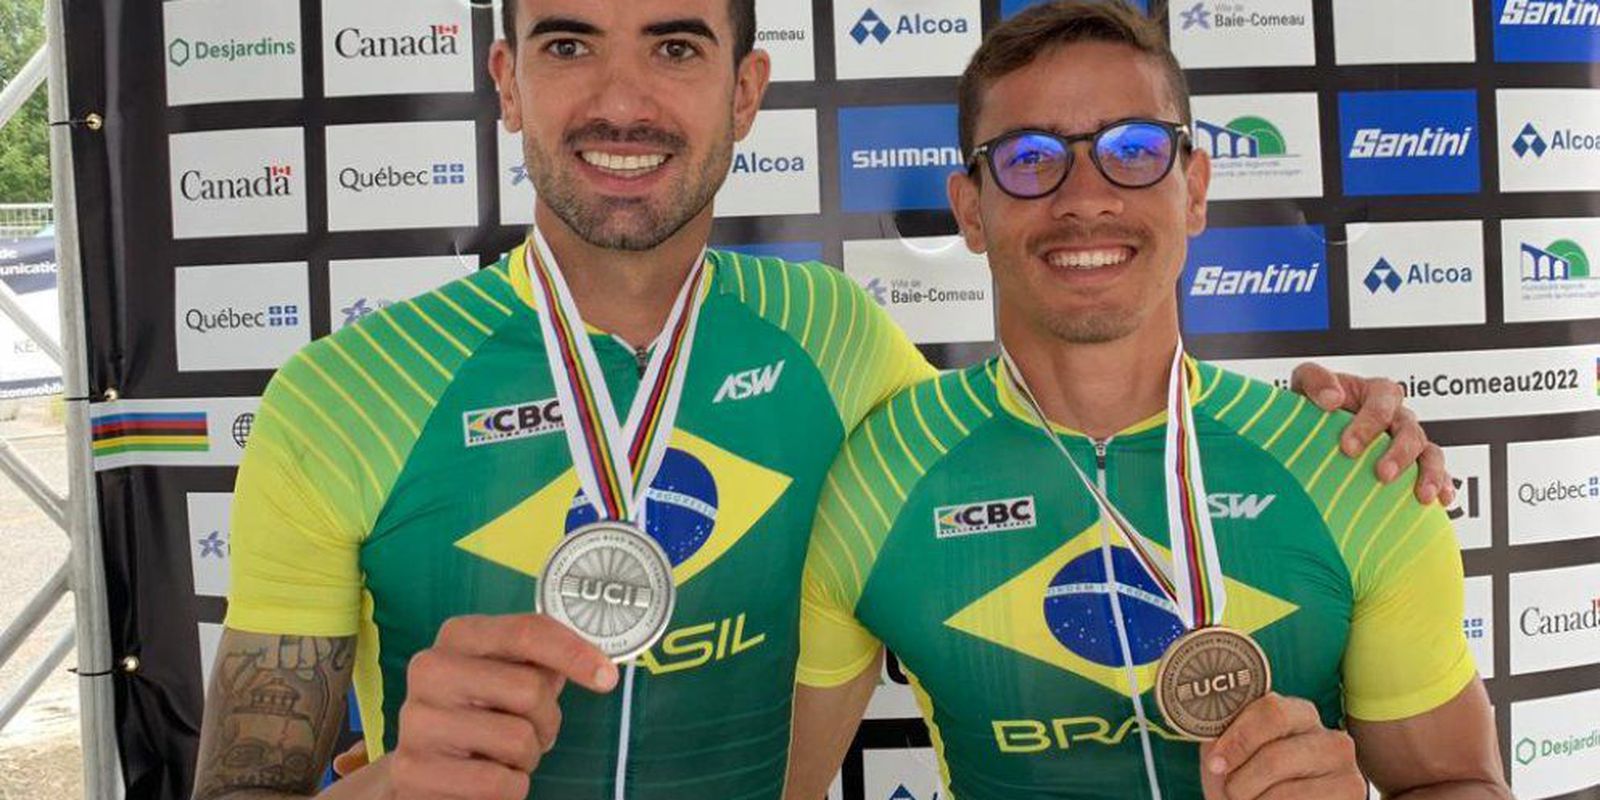 Brazil takes silver and bronze at the Road Paracycling World Cup